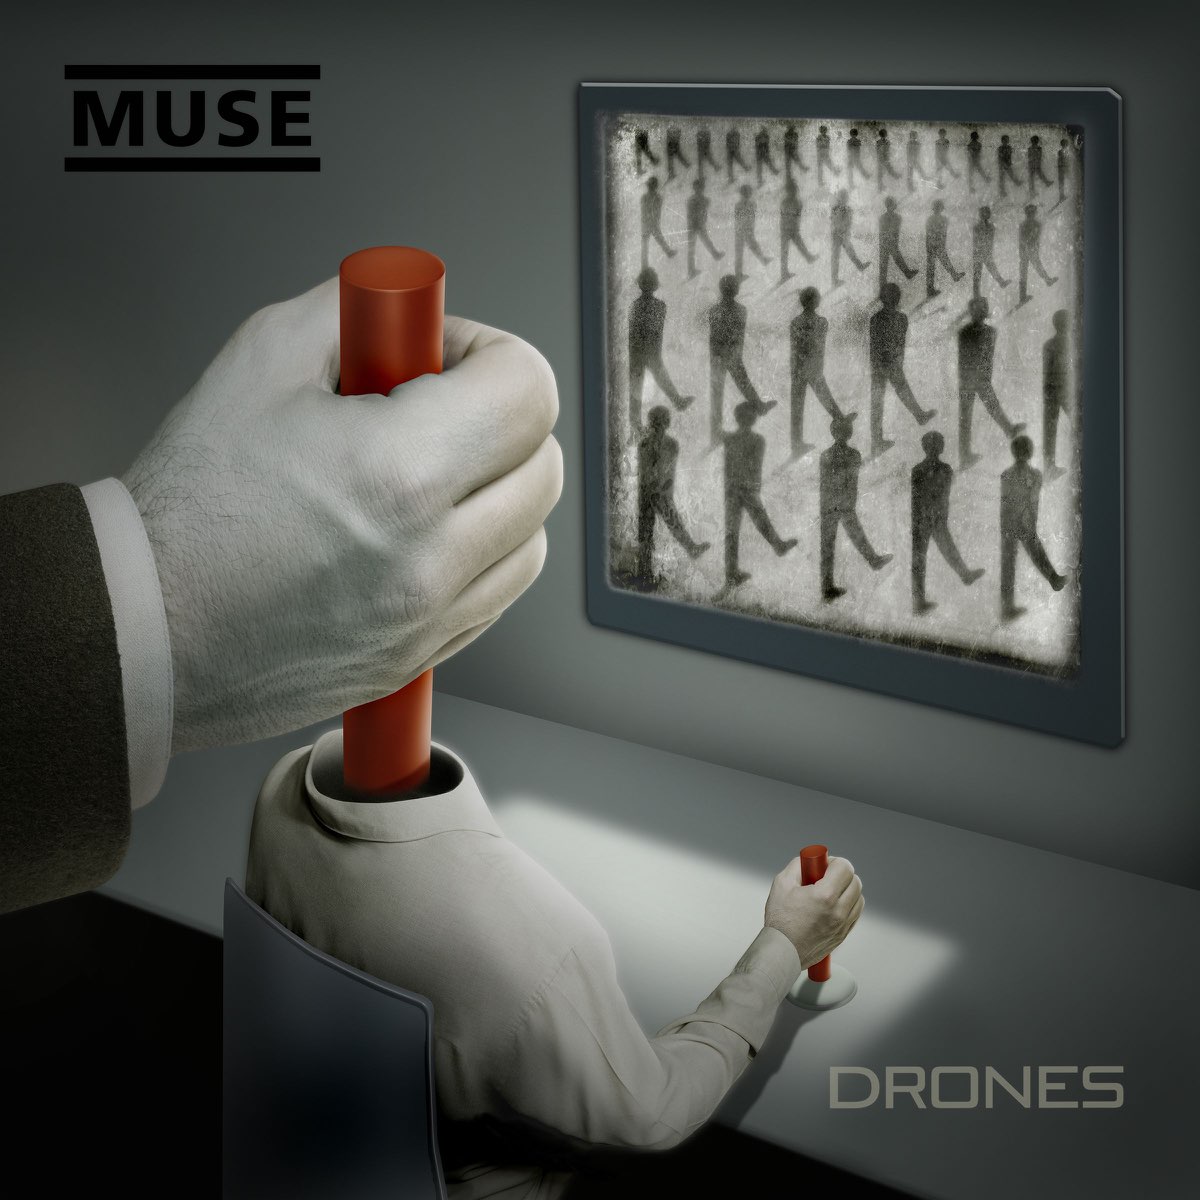 Muse Drones cover artwork